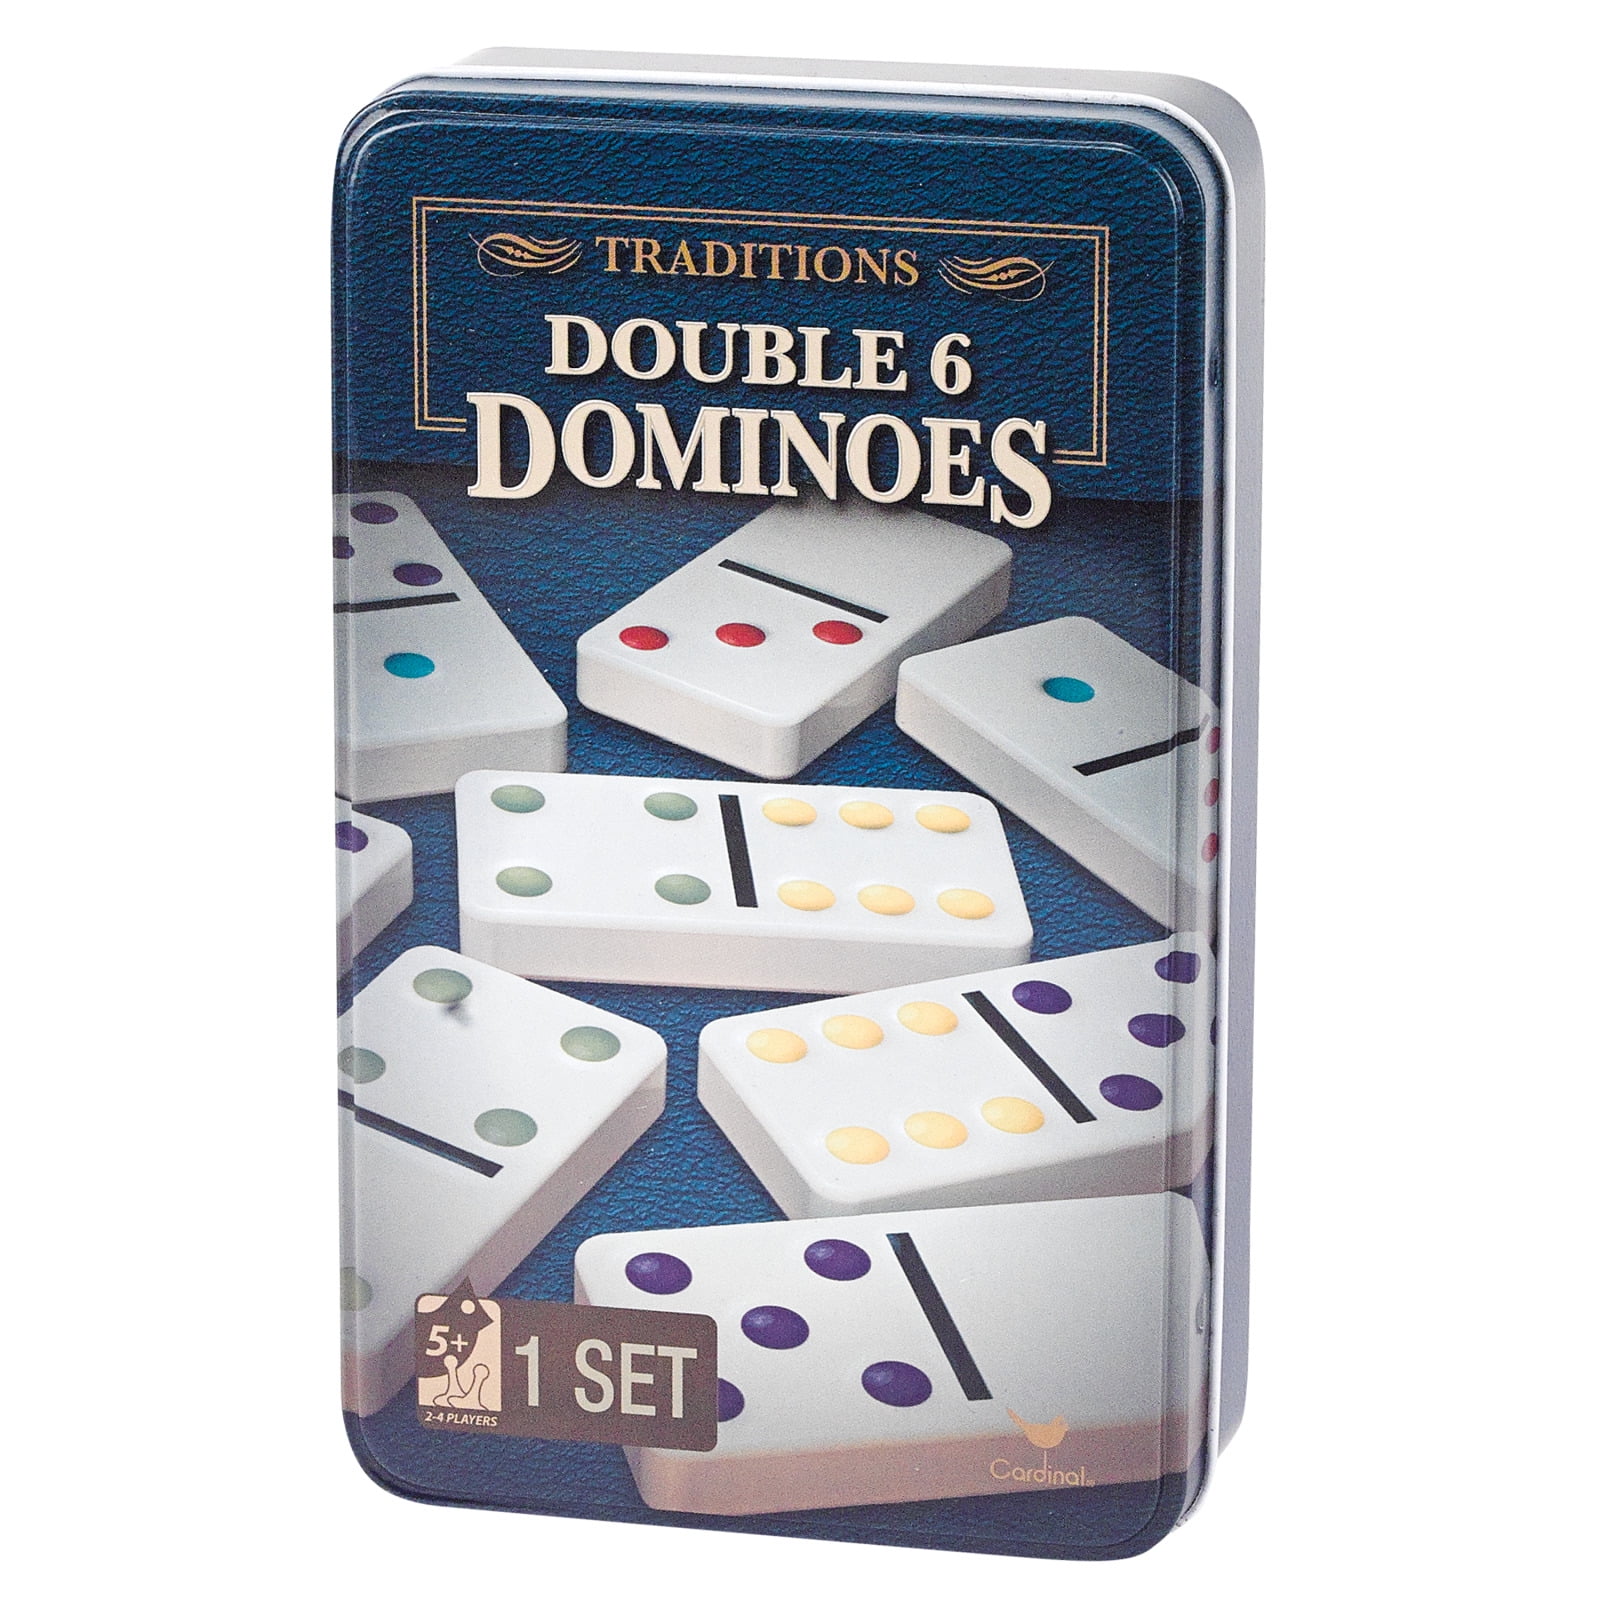 Double 6 Dominoes Black With White Dots Wooden Dominoes 28 PCS 